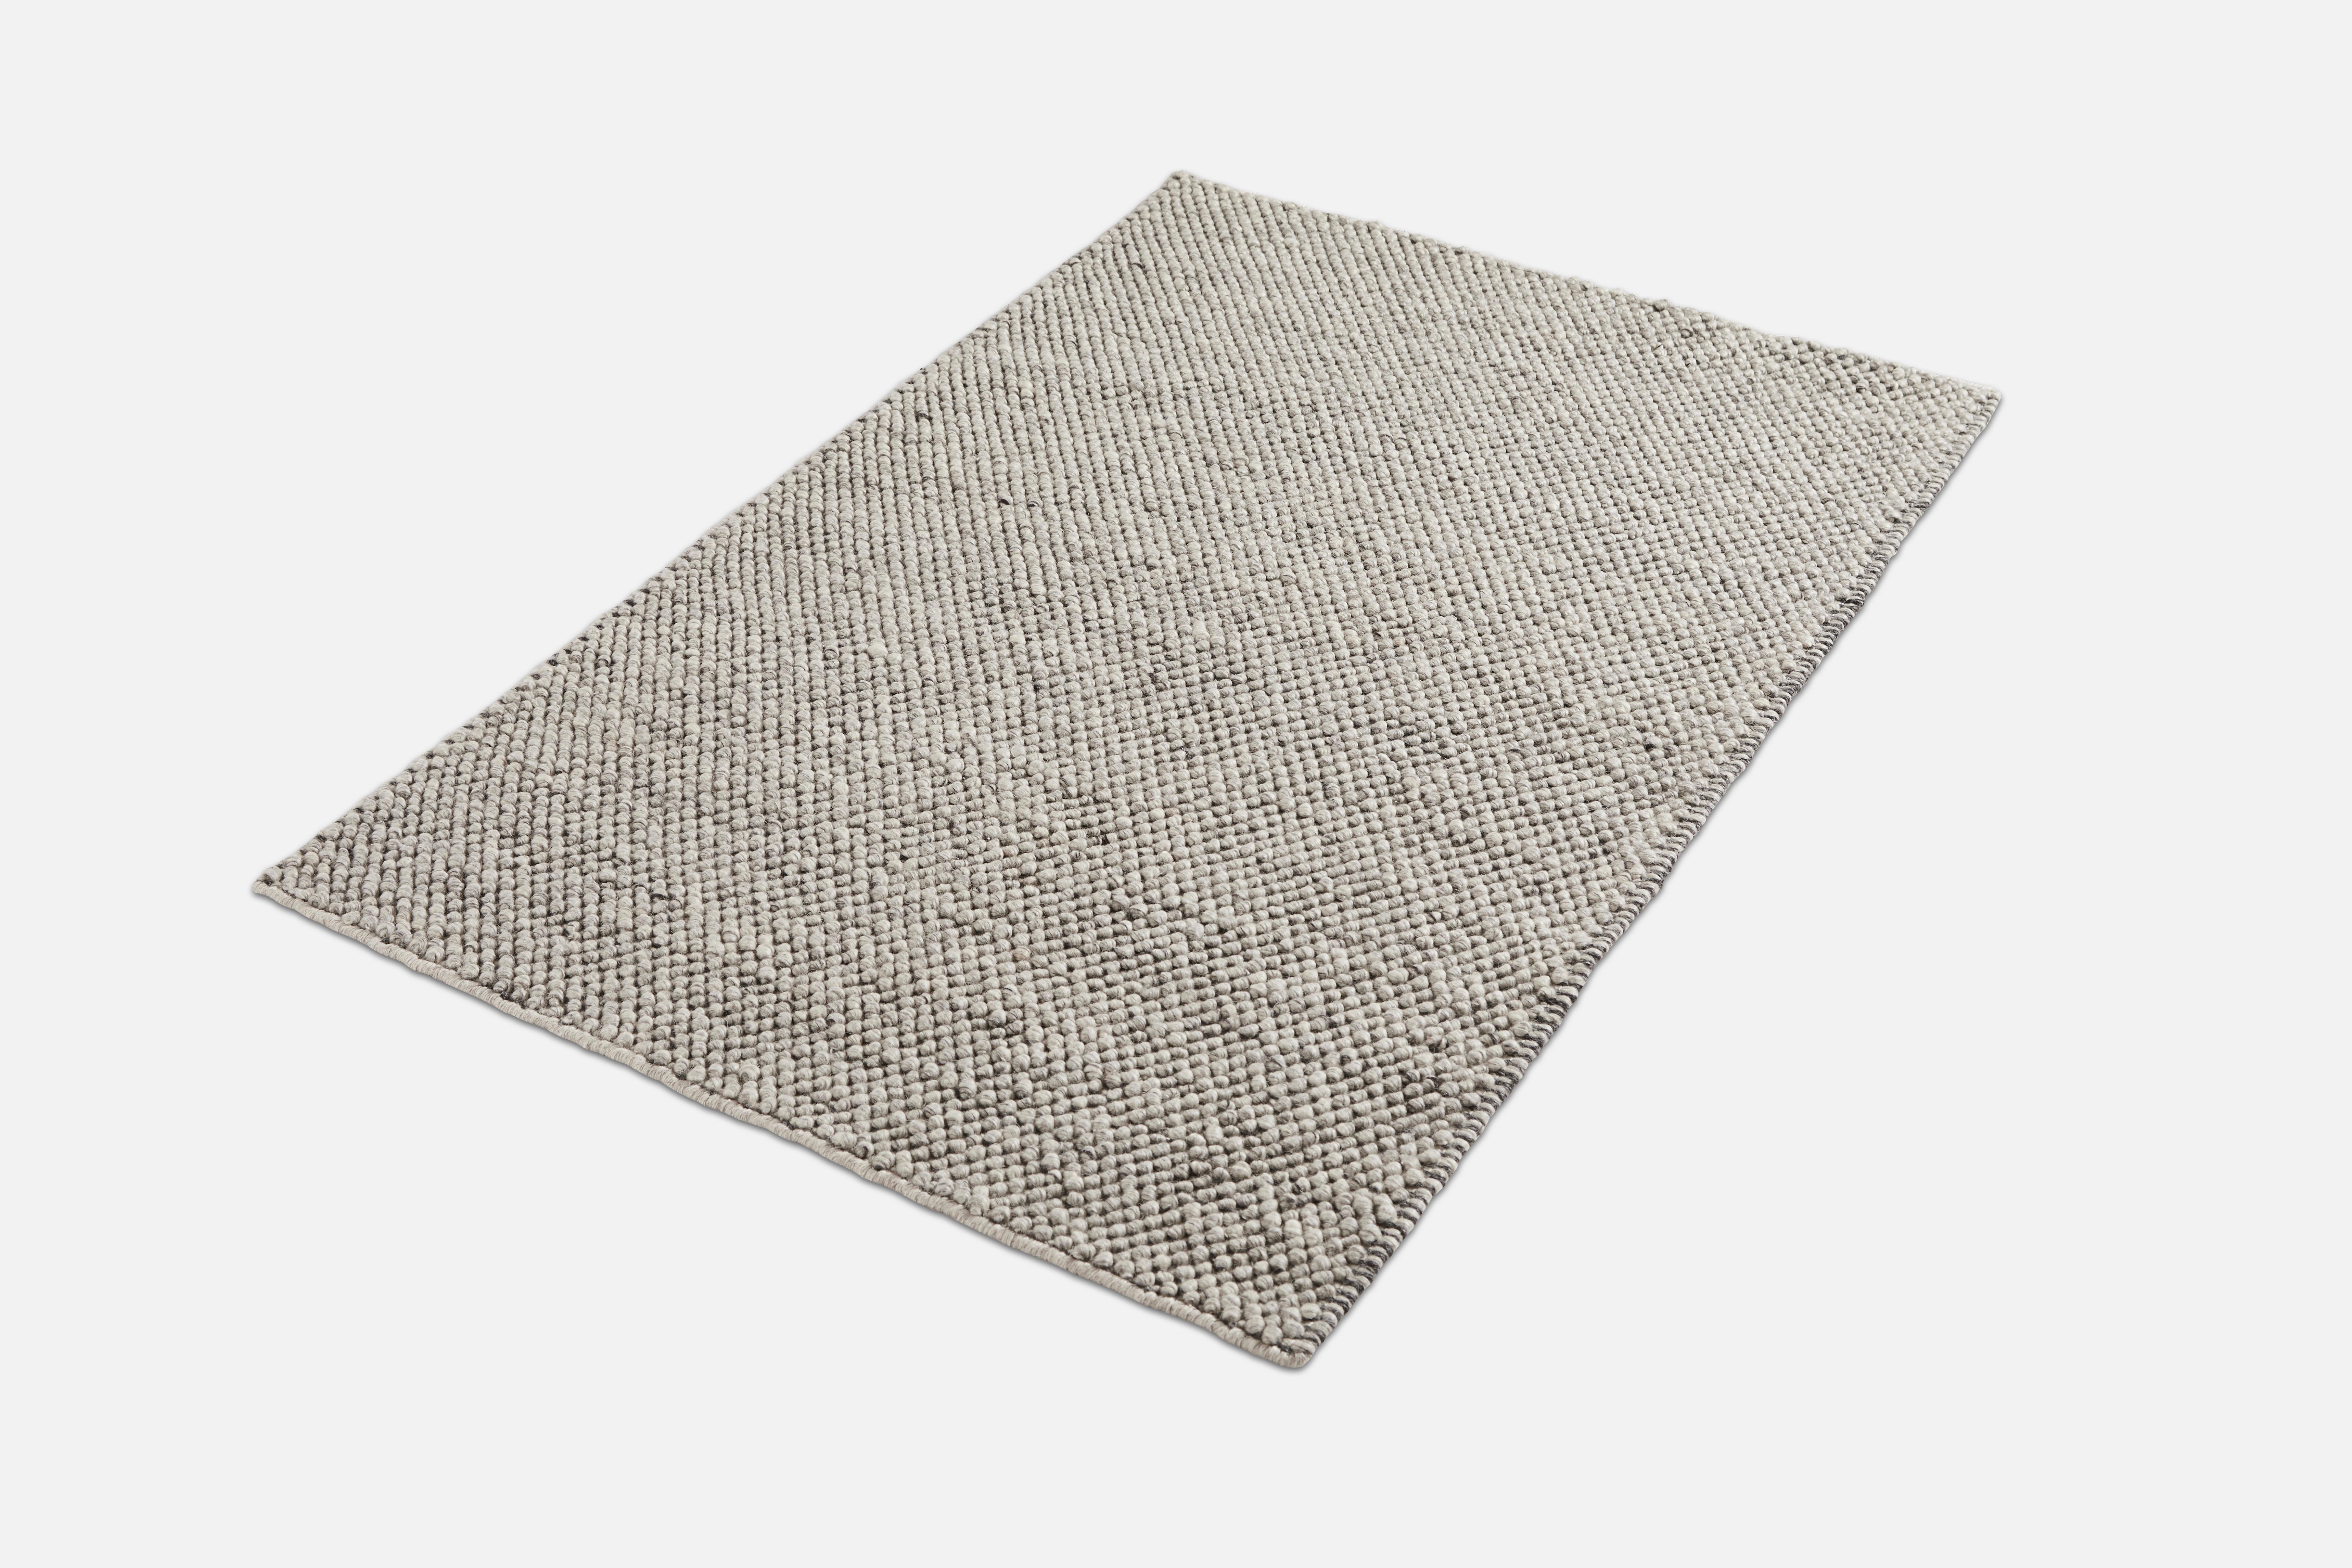 Grey Tact rug by Shazeen
Materials: 90% wool, 10% cotton.
Dimensions: W 170 x L 200 cm
Available in 3 sizes: W 90 x L 140, W 170 x L 240, W 200 x L 300 cm.
Available in off white and dark grey.

Growing up as a child experiencing the inside of